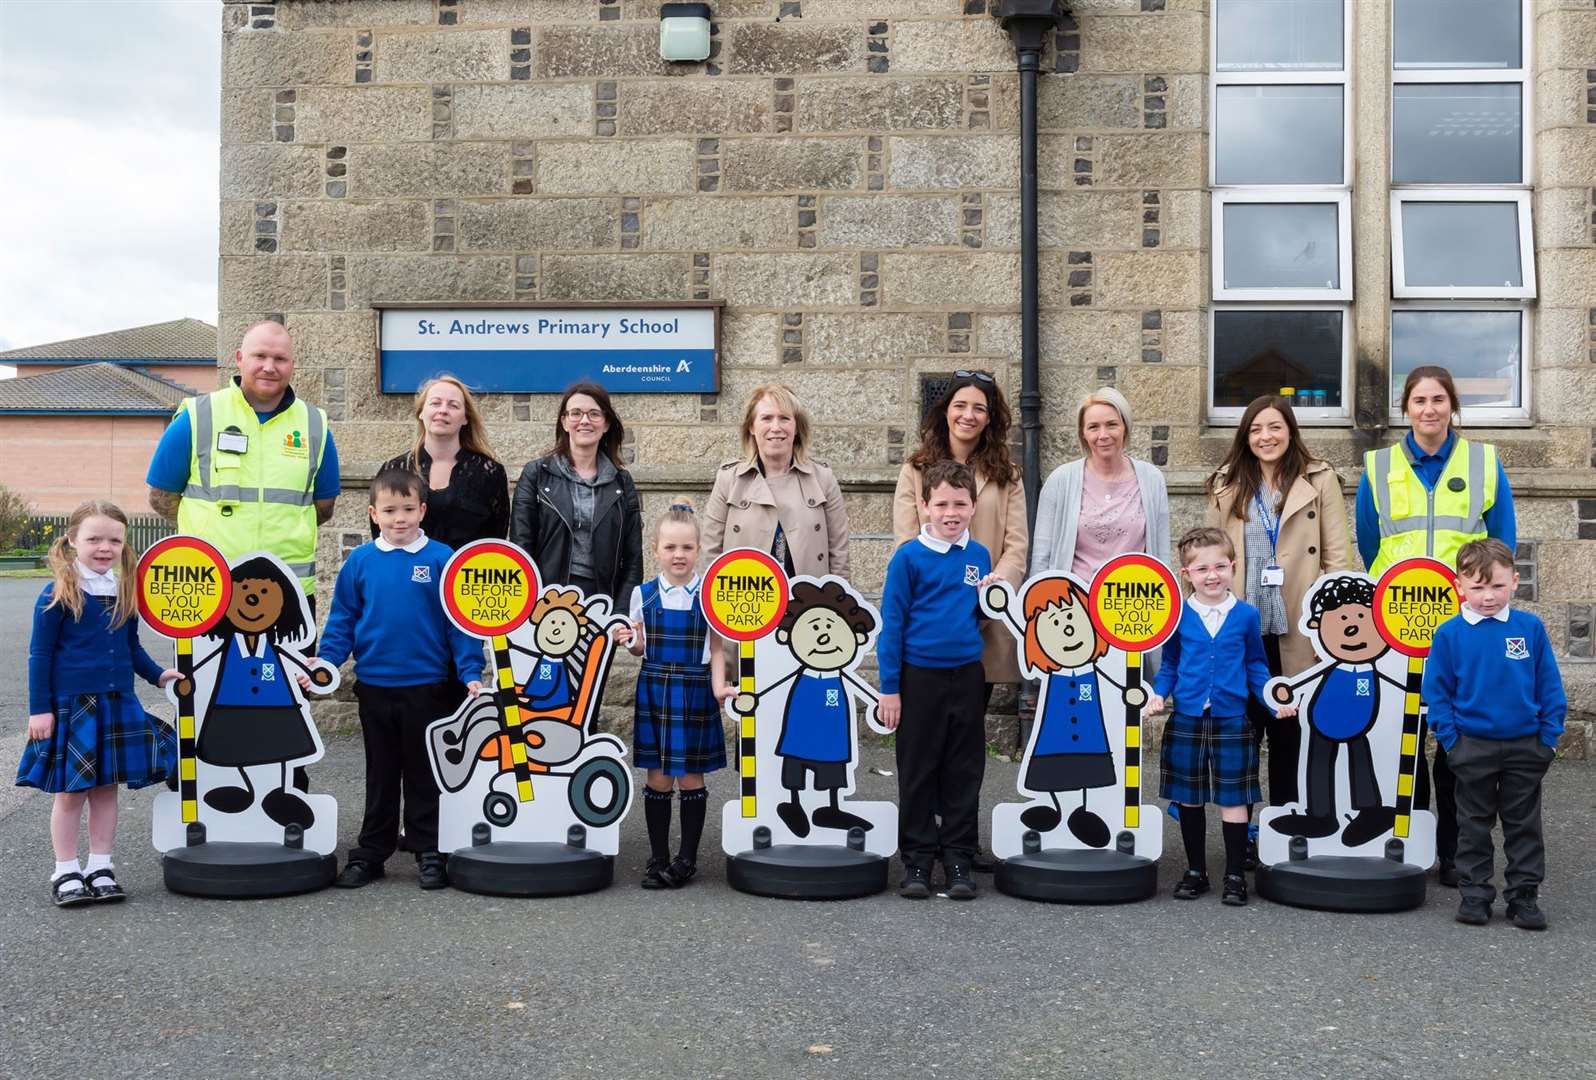 St Andrews Primary School give the parking buddies a warm welcome.